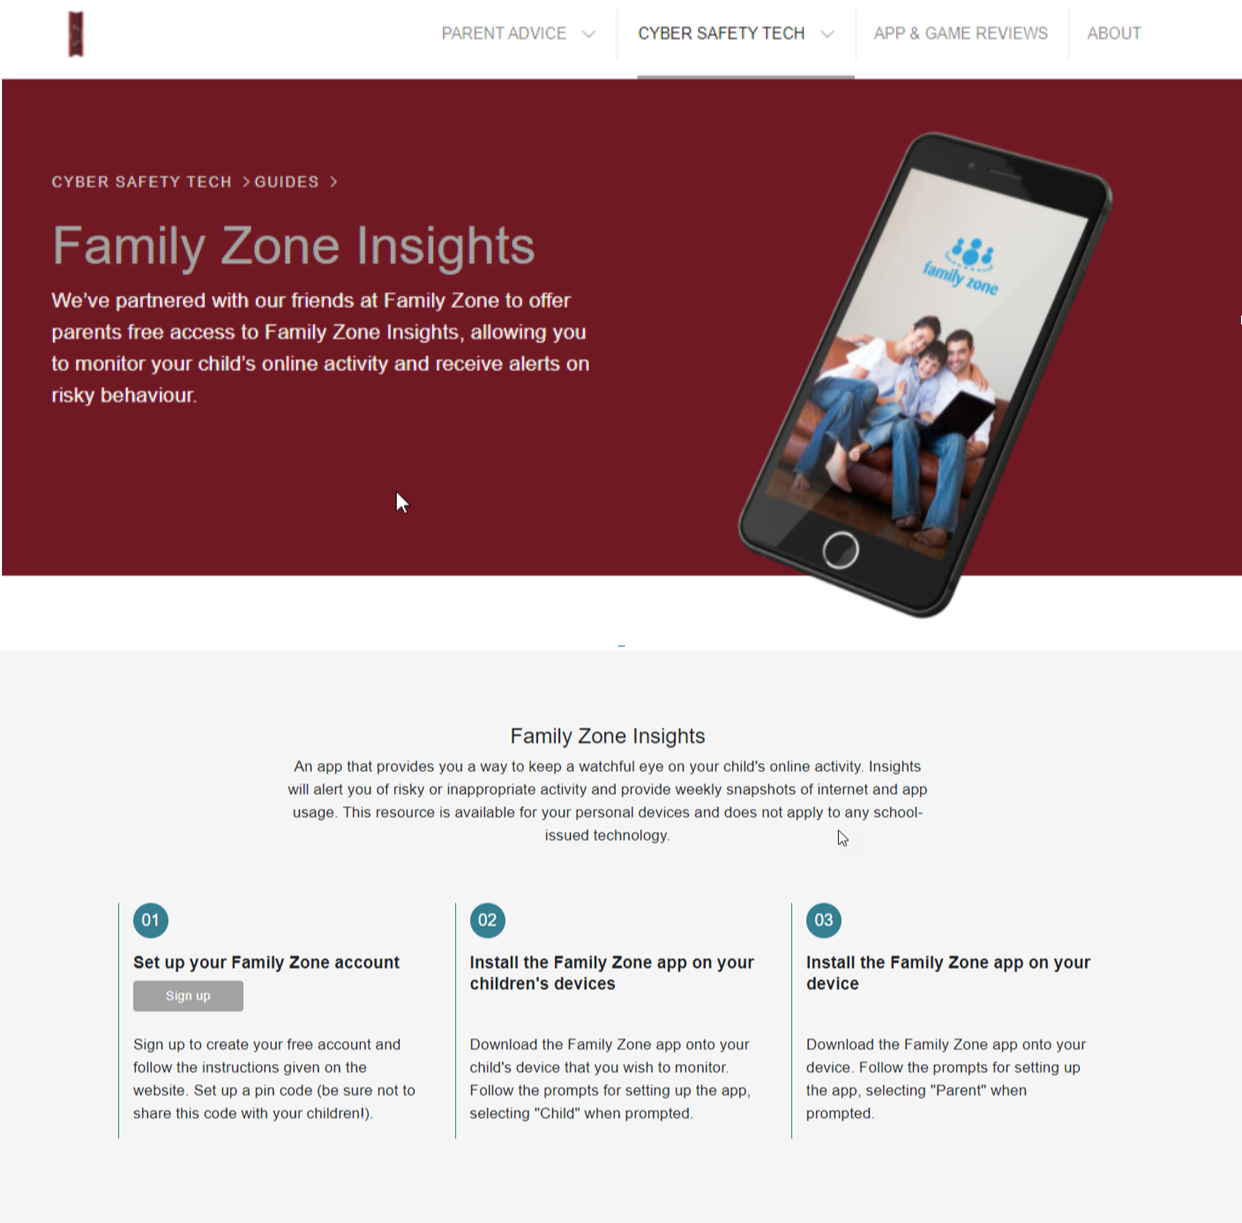 FamilyZone Insights for monitoring